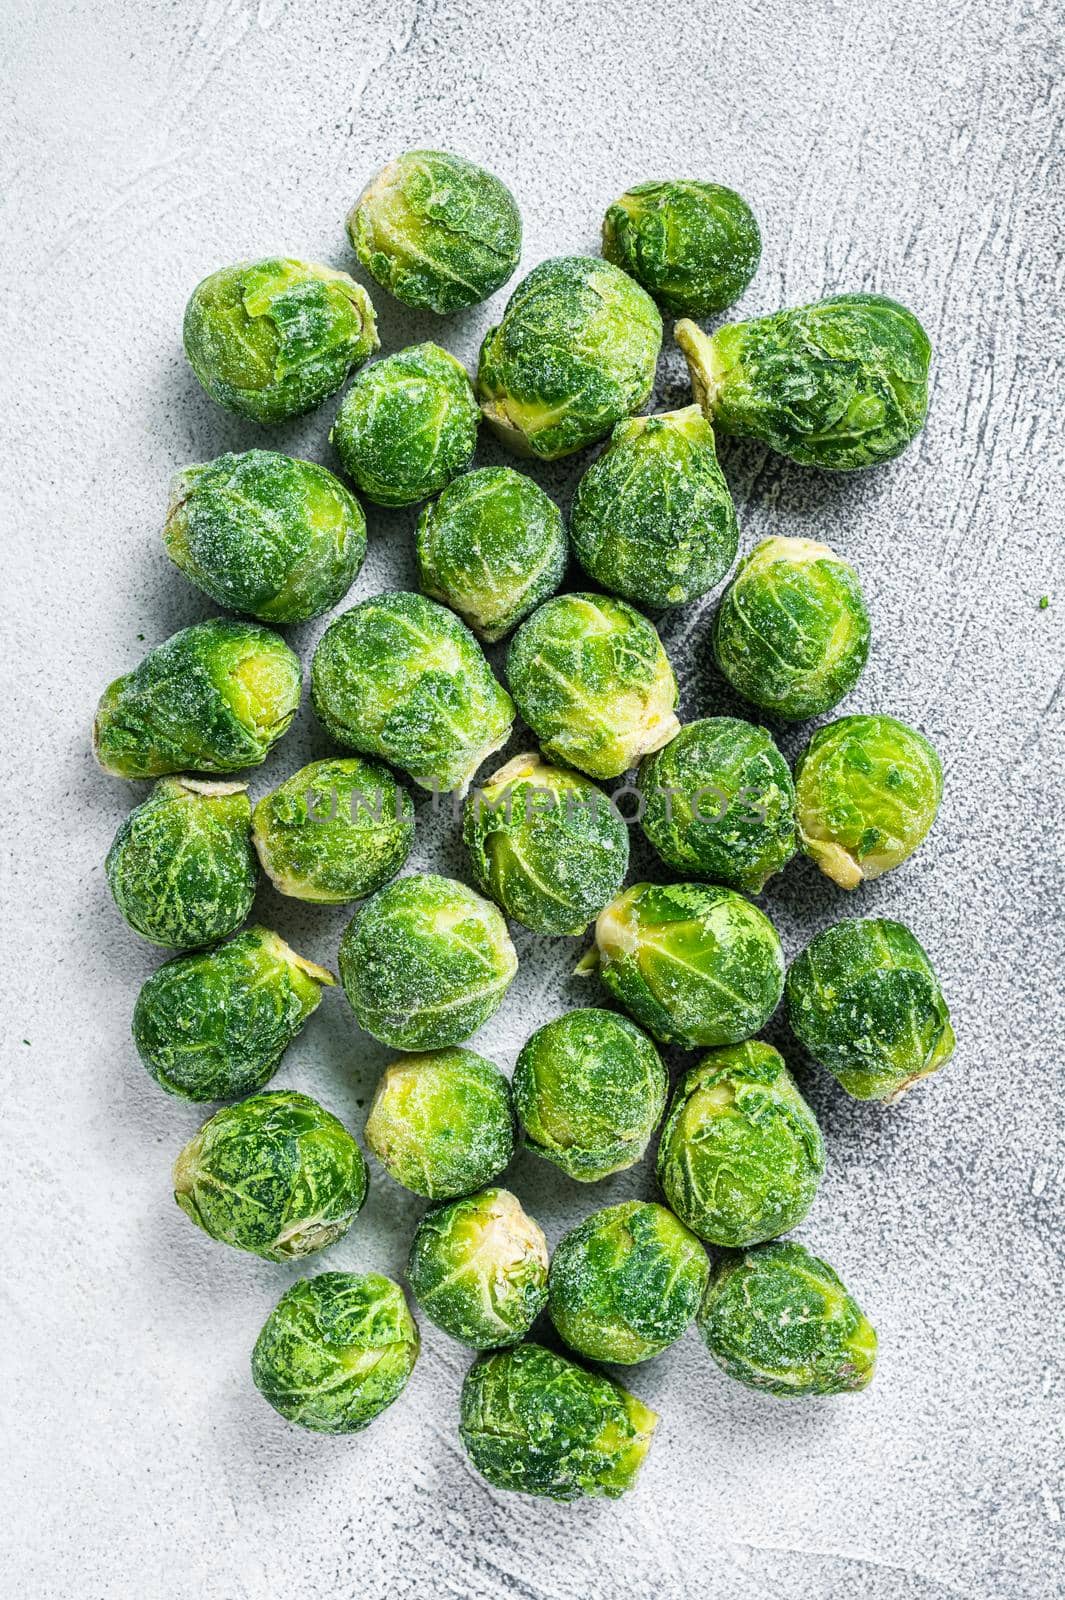 Frozen Brussels sprouts green cabbage on kitchen table. White background. Top view by Composter